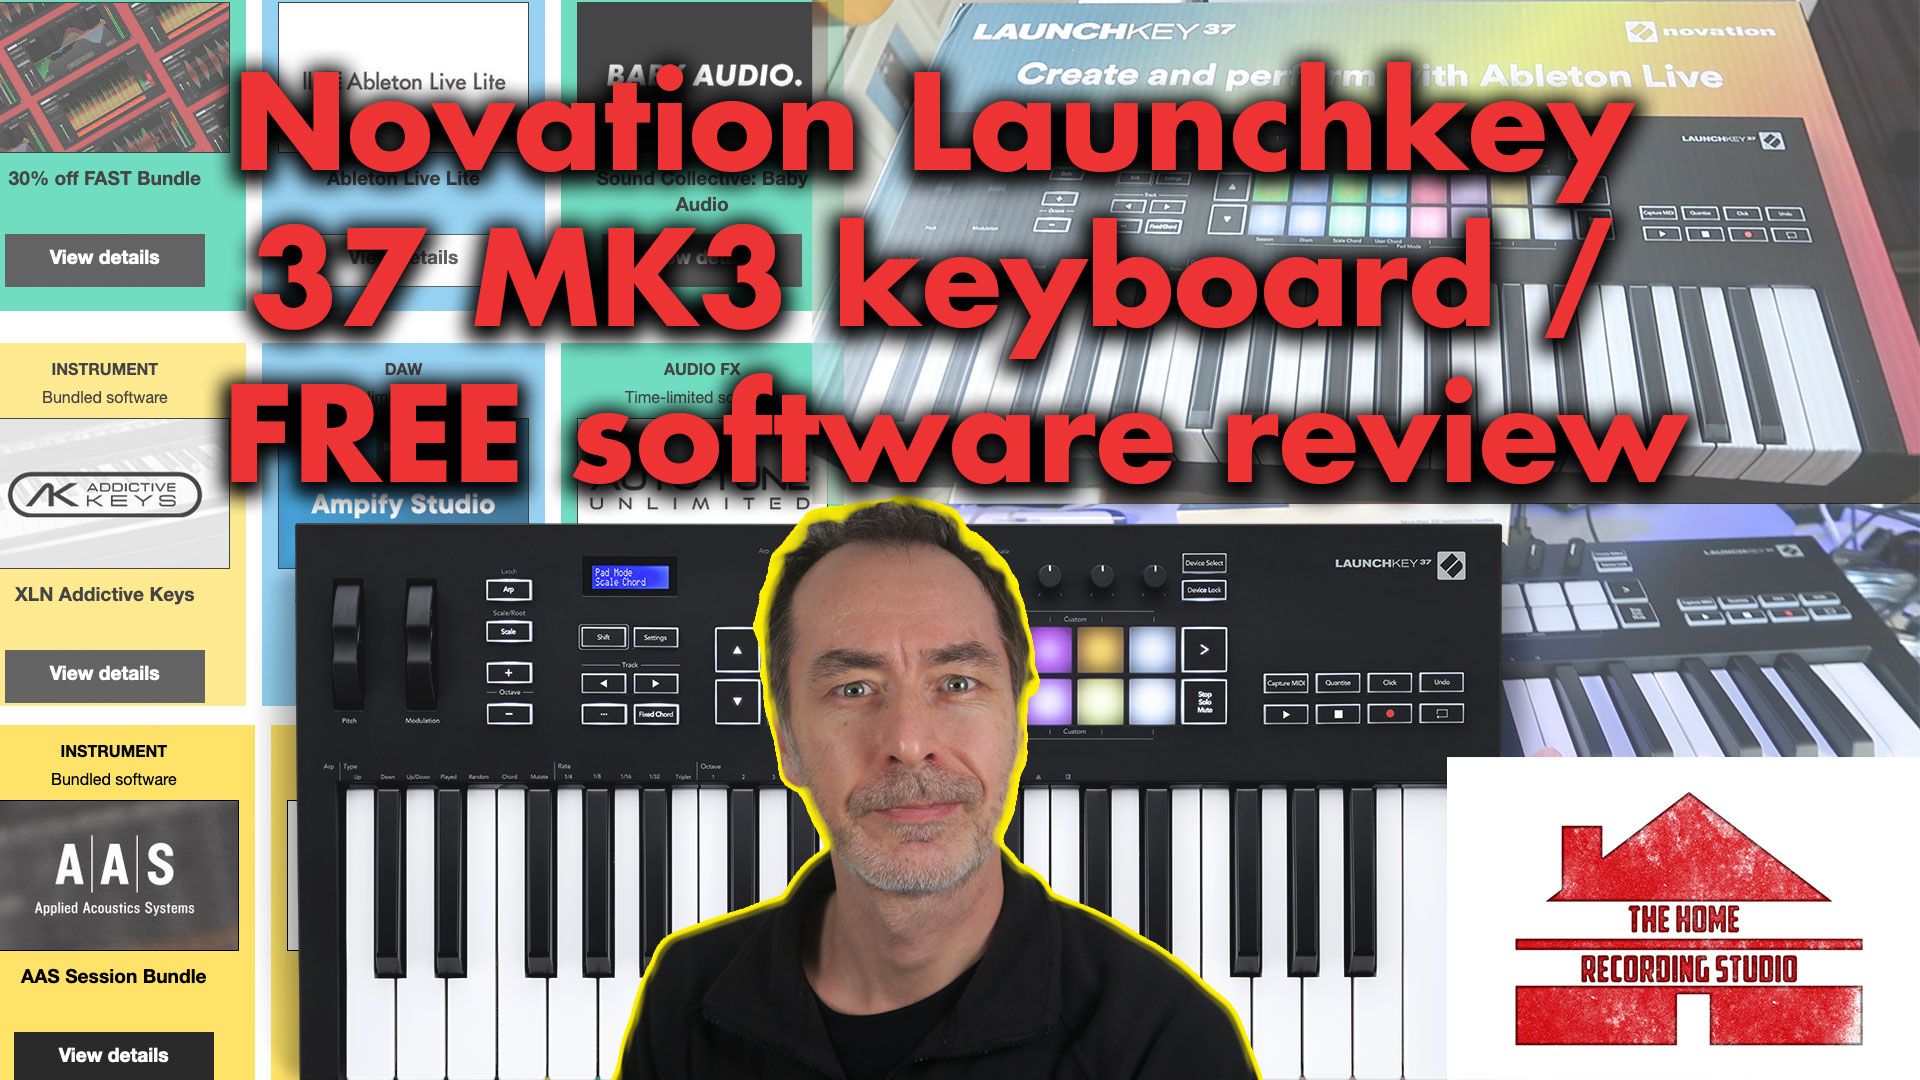 Novation Launchkey 37 Mk3 Keyboard review The Home Recording Studio